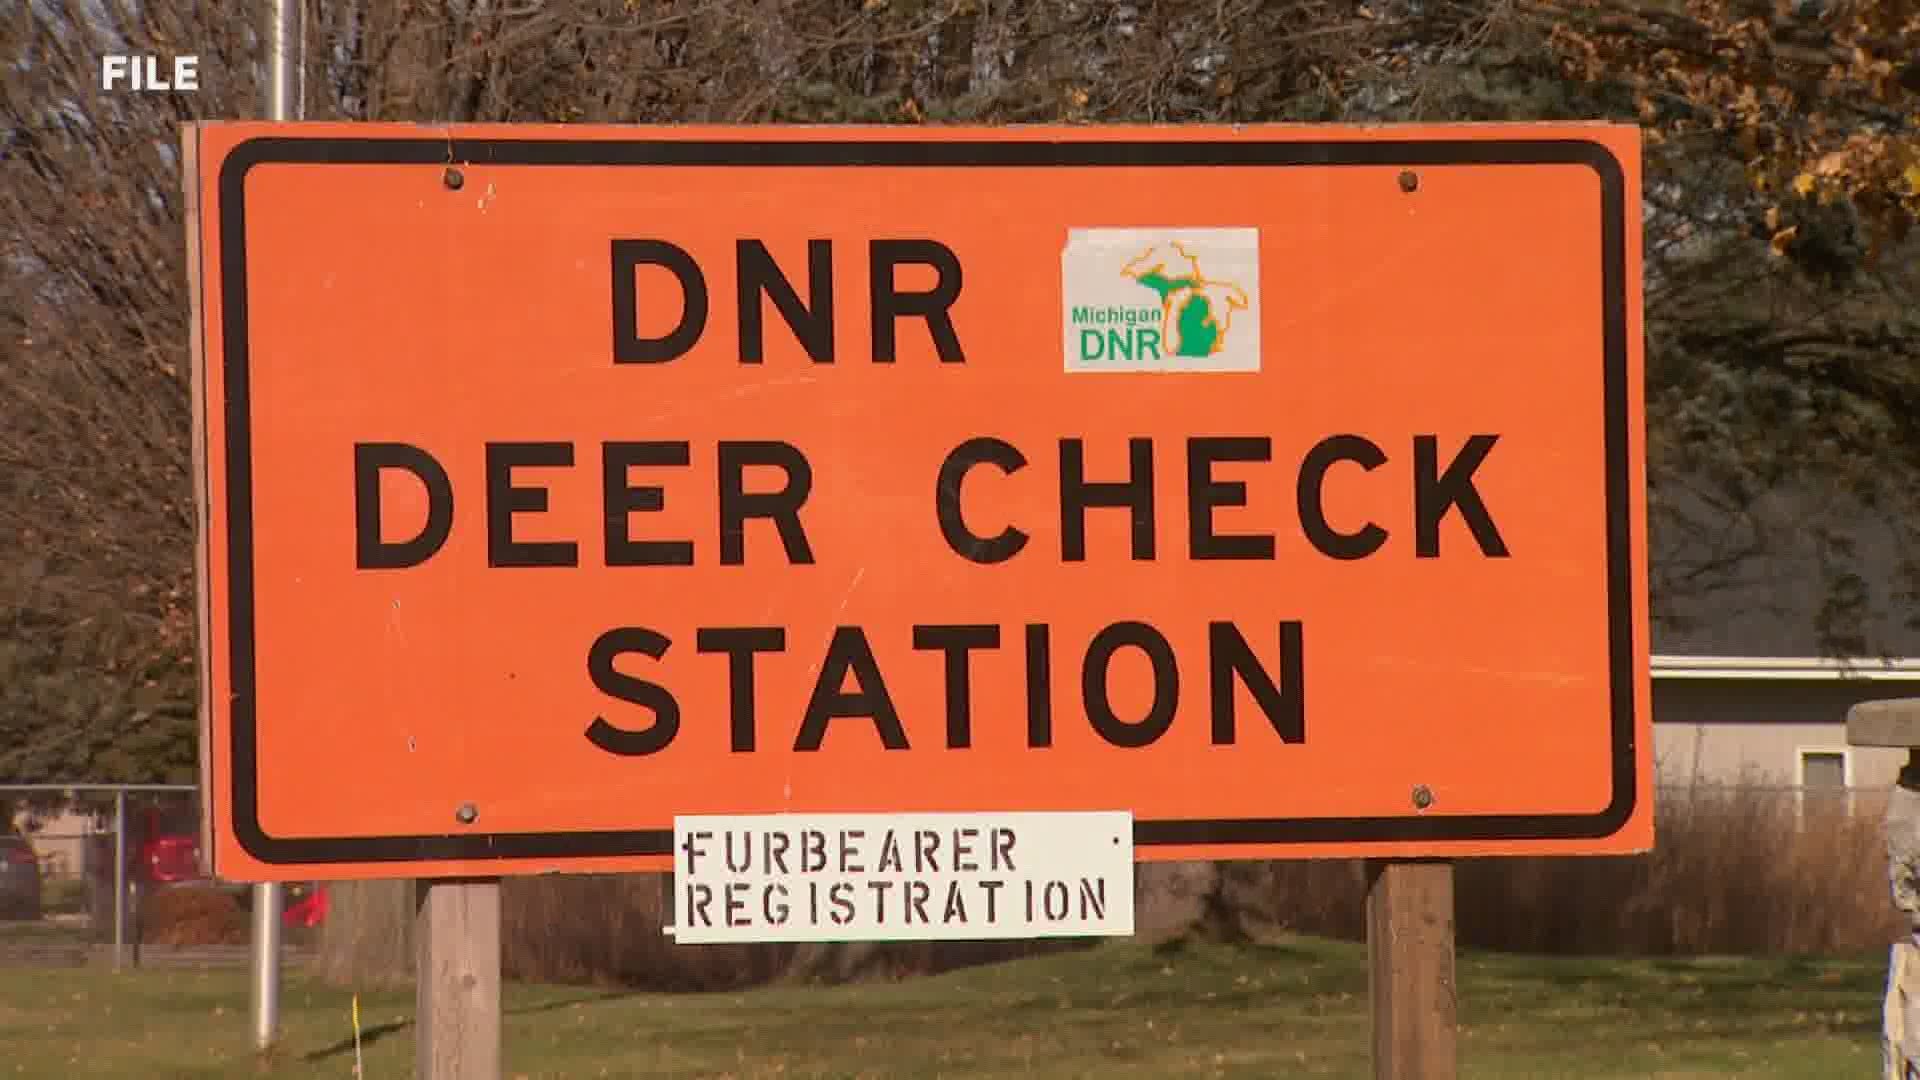 Hunters should expect deer checks and CWD testing changes due to DNR budget cuts.